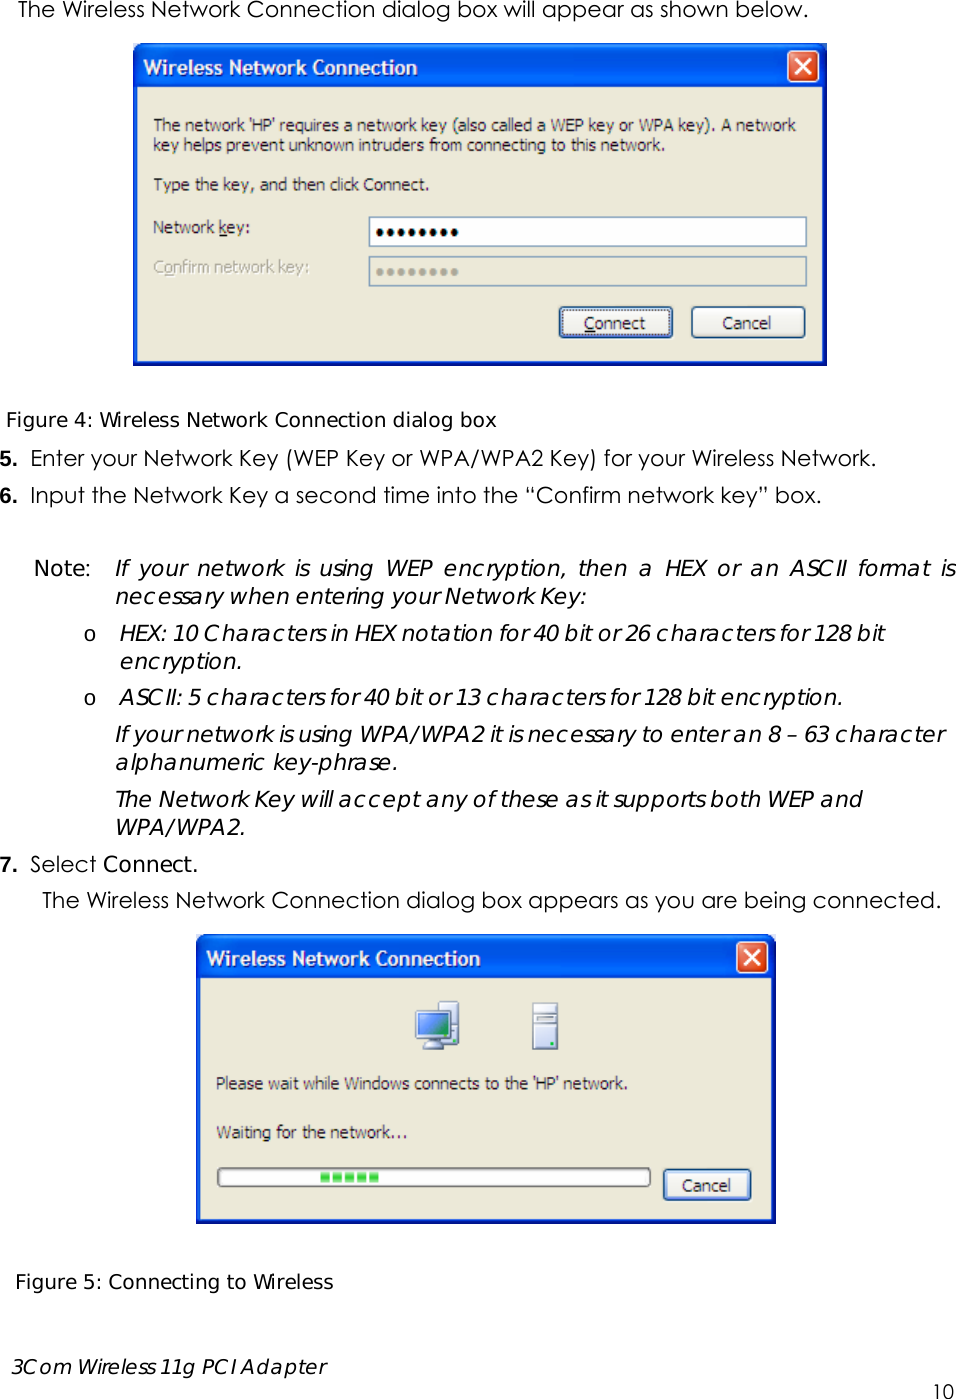      3Com Wireless 11g PCI Adapter     10 The Wireless Network Connection dialog box will appear as shown below.    Figure 4: Wireless Network Connection dialog box 5.  Enter your Network Key (WEP Key or WPA/WPA2 Key) for your Wireless Network. 6.  Input the Network Key a second time into the “Confirm network key” box.  Note:  If your network is using WEP encryption, then a HEX or an ASCII format is necessary when entering your Network Key: o HEX: 10 Characters in HEX notation for 40 bit or 26 characters for 128 bit encryption. o ASCII: 5 characters for 40 bit or 13 characters for 128 bit encryption. If your network is using WPA/WPA2 it is necessary to enter an 8 – 63 character alphanumeric key-phrase.   The Network Key will accept any of these as it supports both WEP and WPA/WPA2. 7.  Select Connect. The Wireless Network Connection dialog box appears as you are being connected.    Figure 5: Connecting to Wireless  